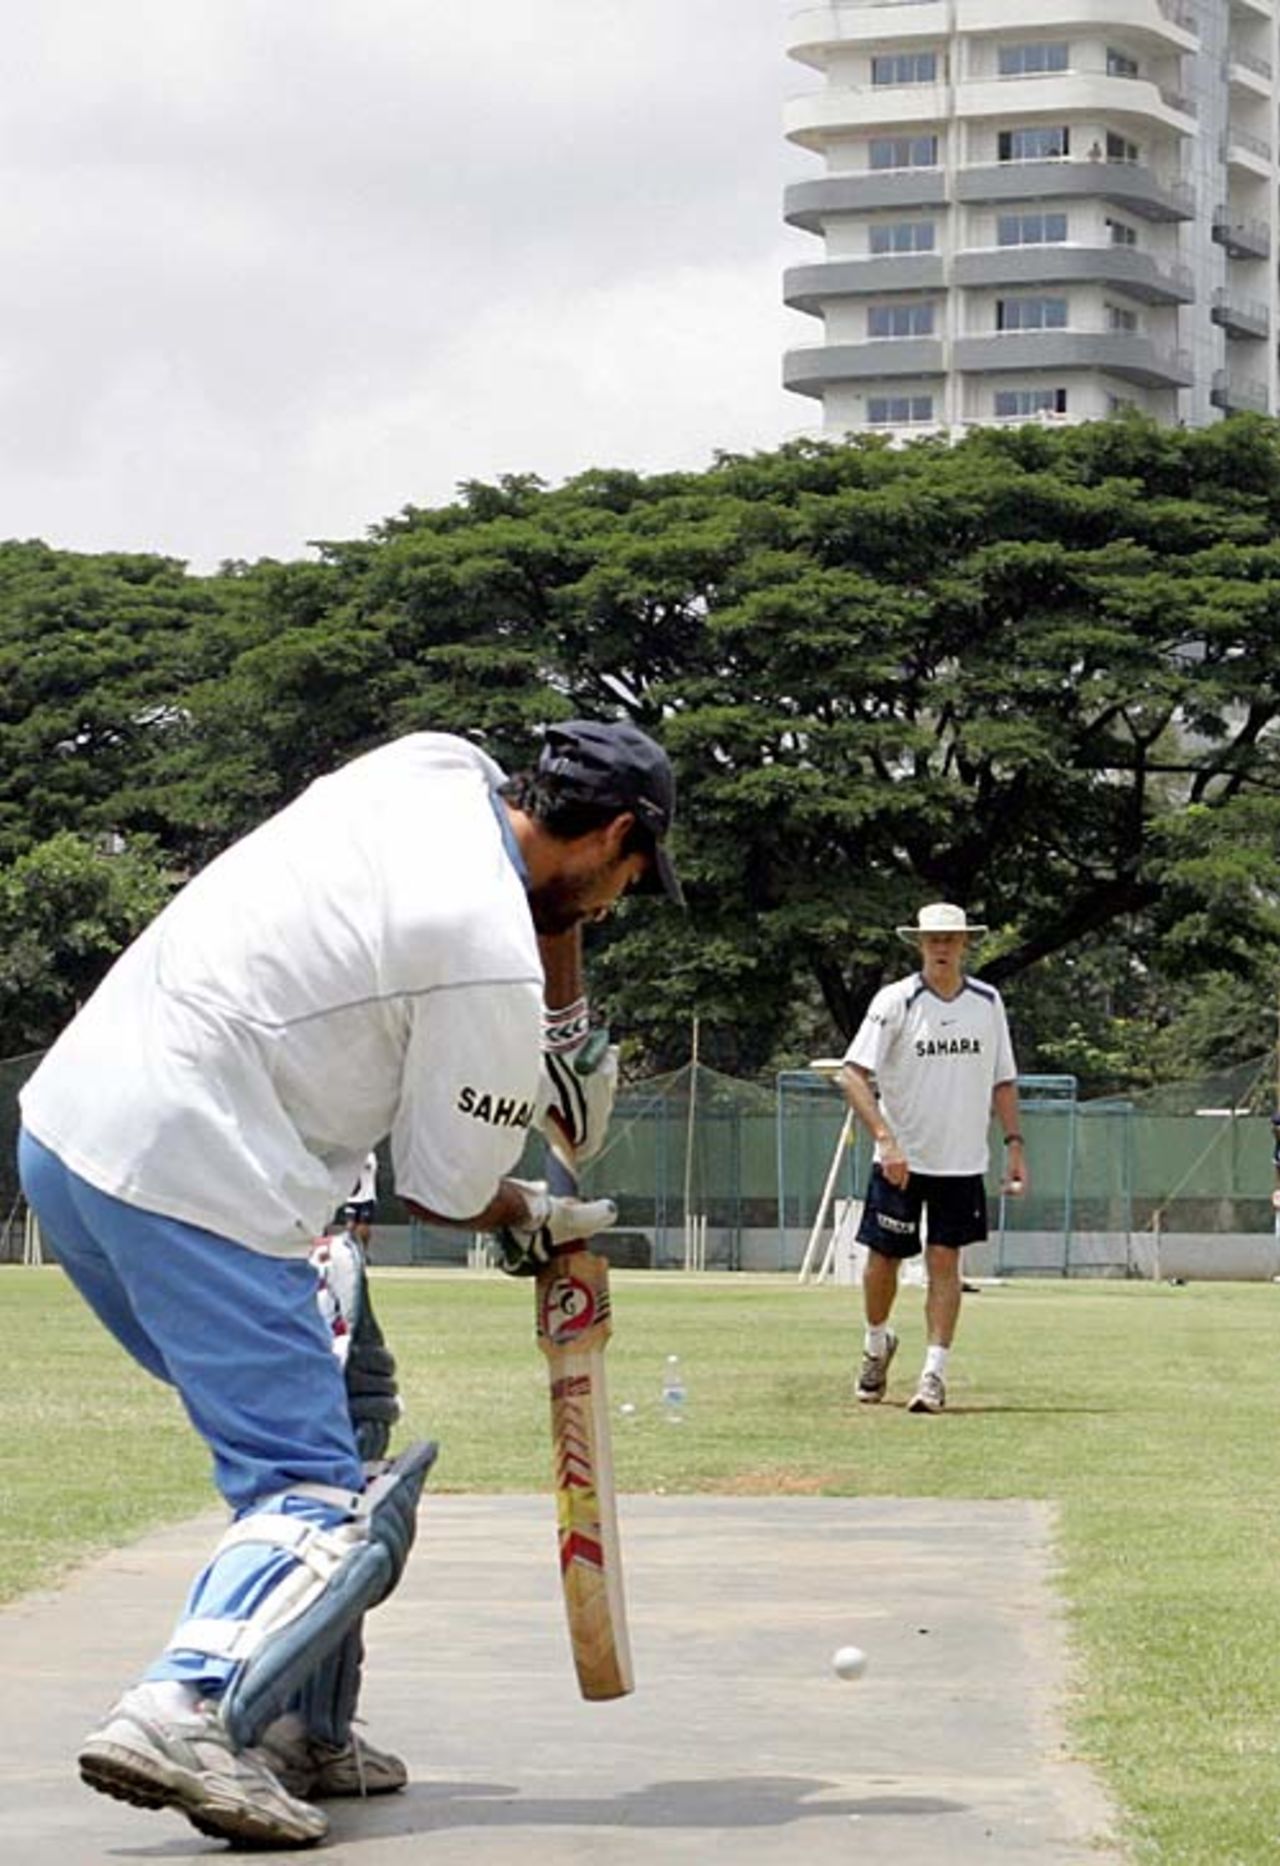 Greg Chappell watches Mohammed Kaif bat during a training session at The National Cricket Academy (NCA), Bangalore, August 30, 2006